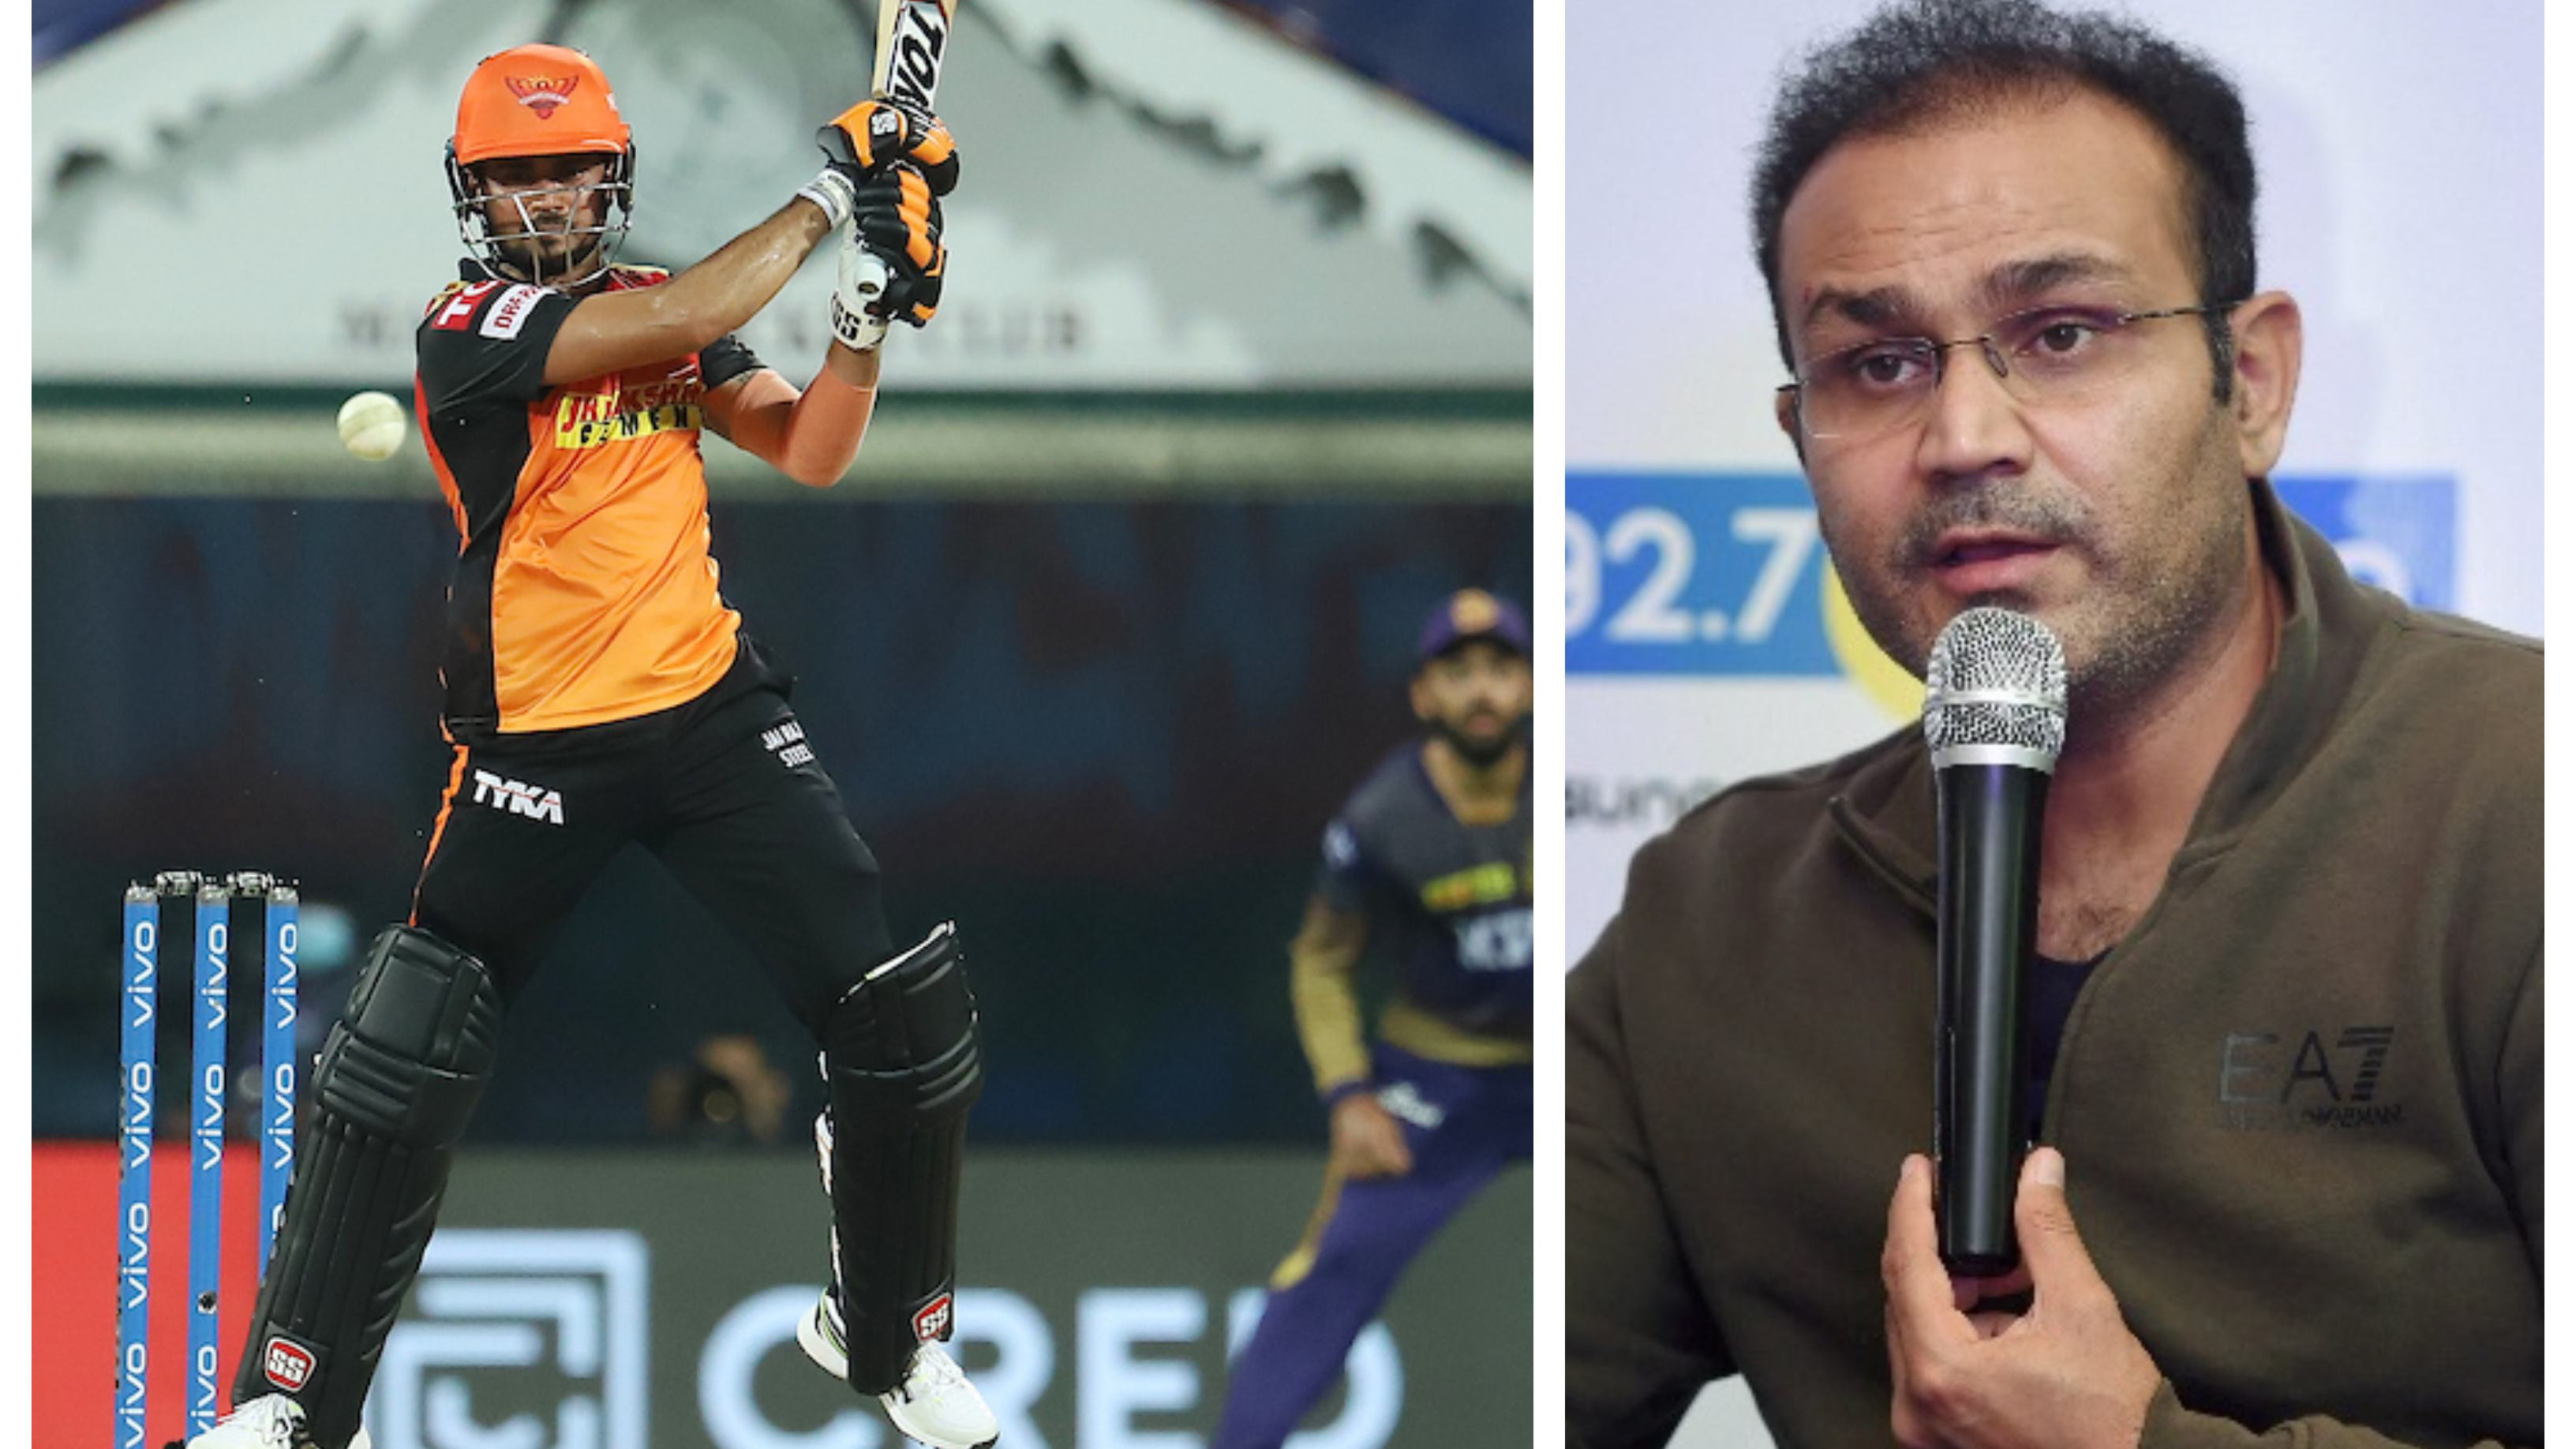 IPL 2021: Virender Sehwag takes a dig at Manish Pandey as his 61* fails to take SRH over the line against KKR